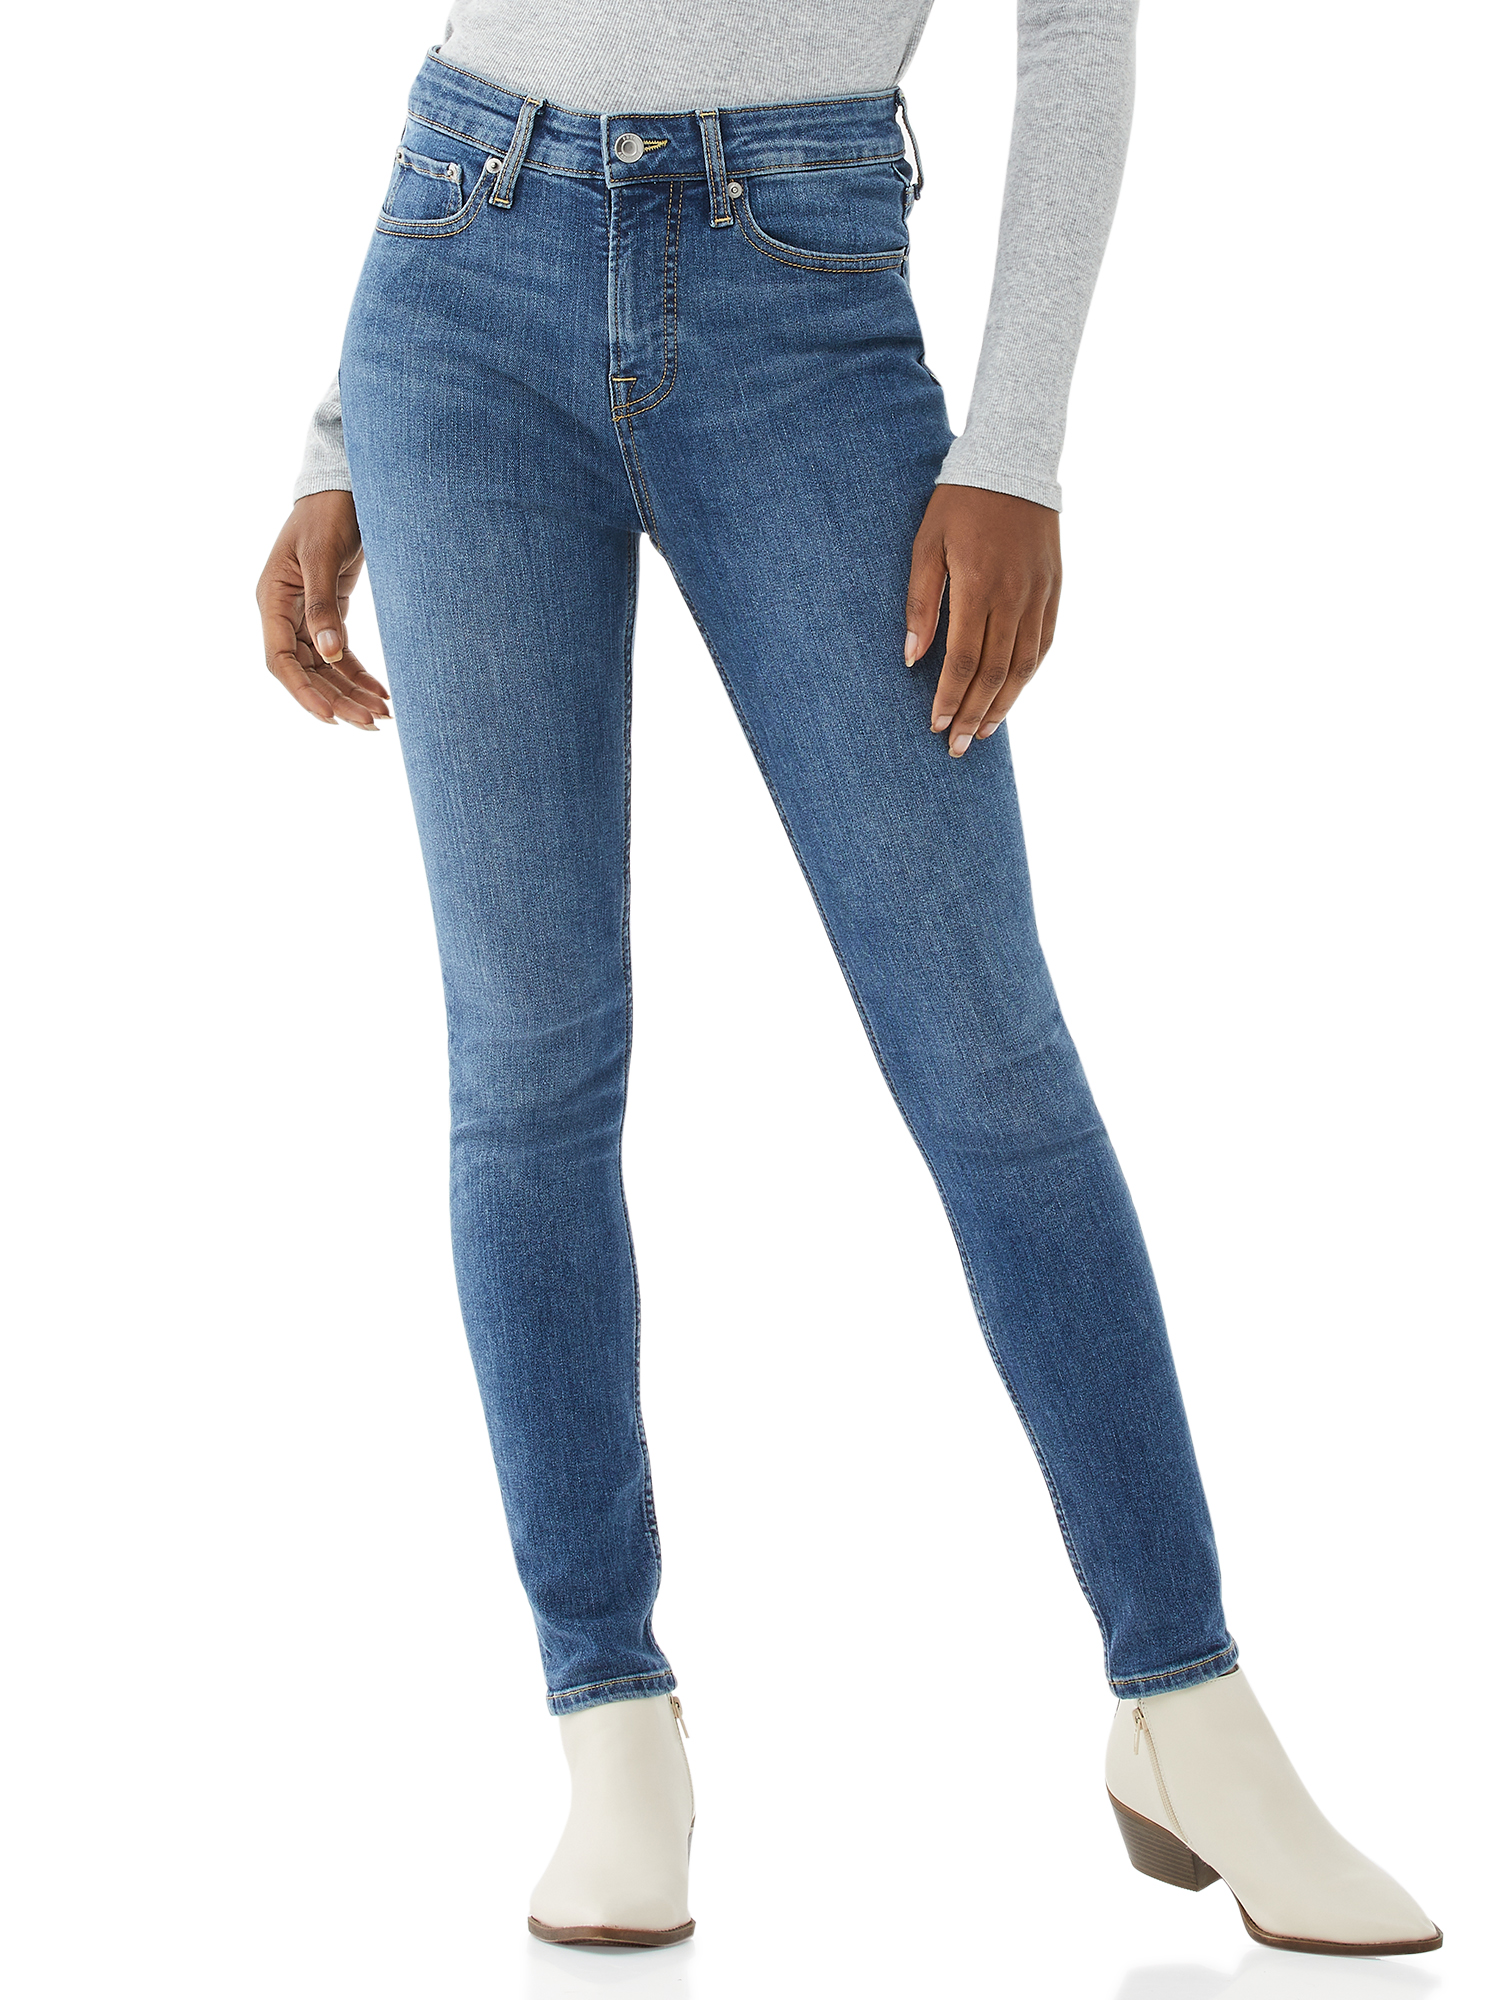 Free Assembly Women's Essential High Rise Skinny Jeans - image 1 of 8